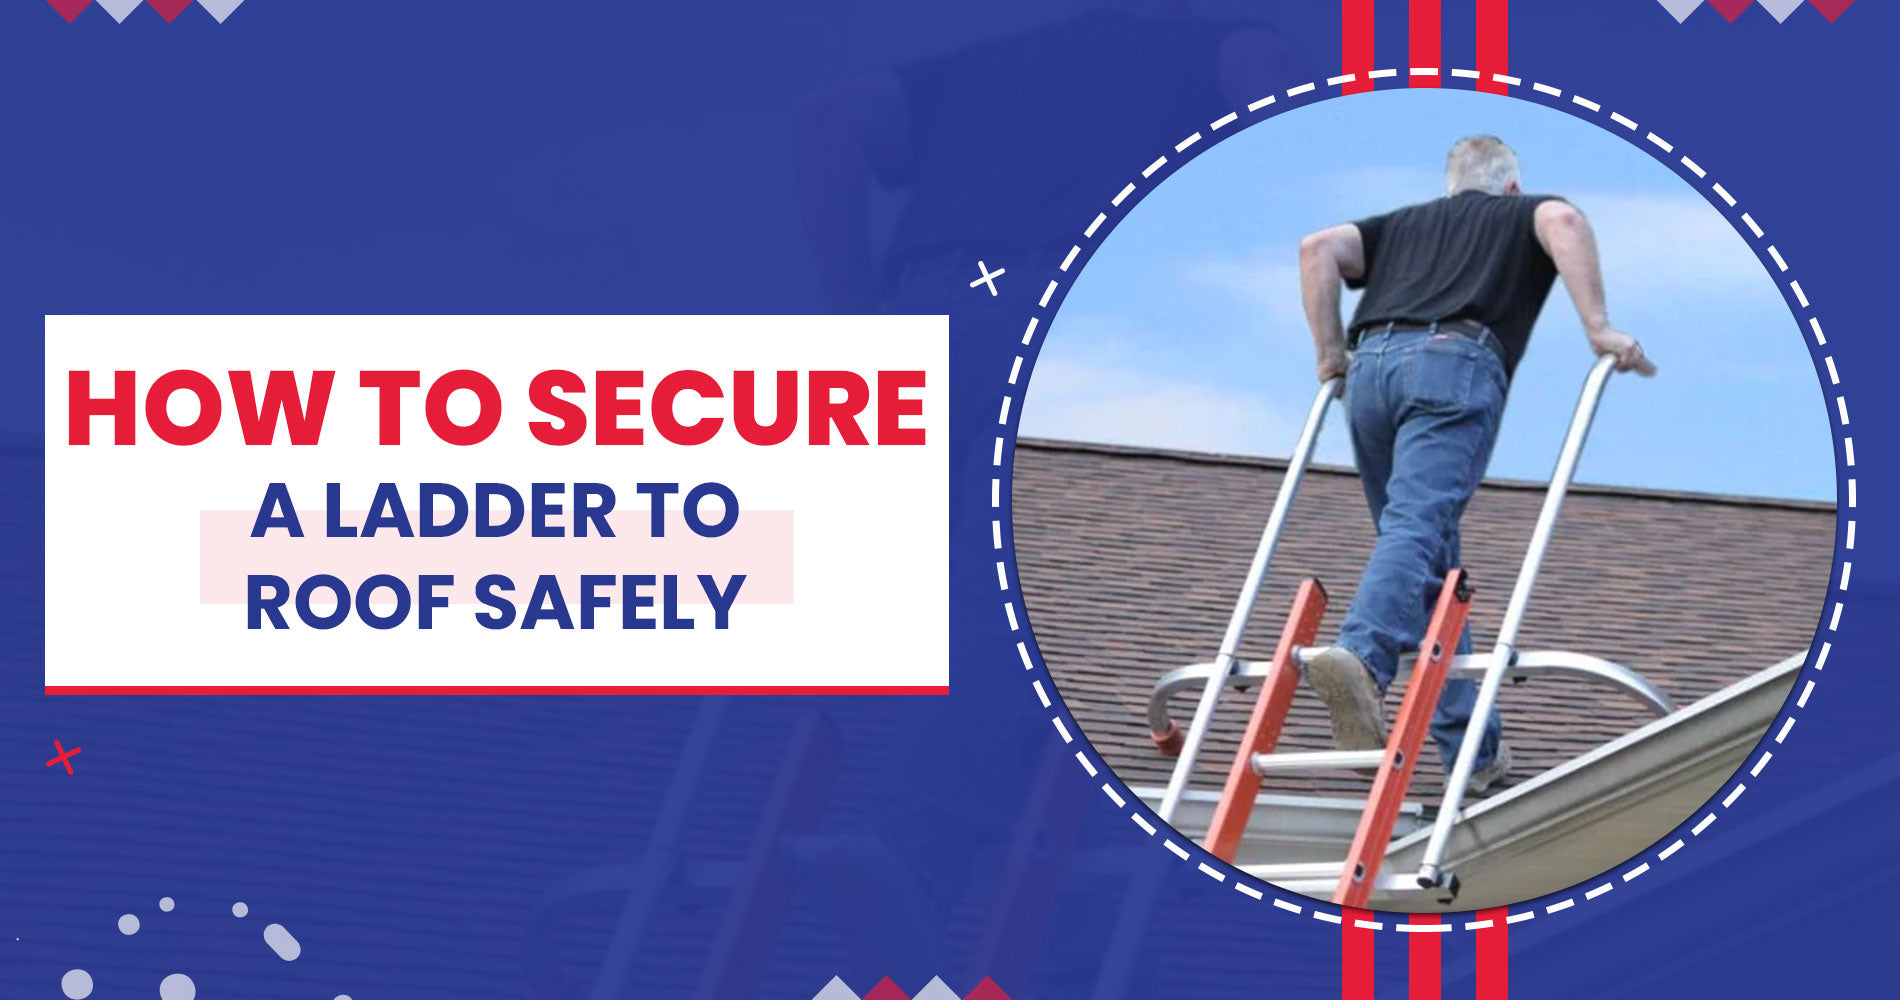 How to secure ladder to roof safely